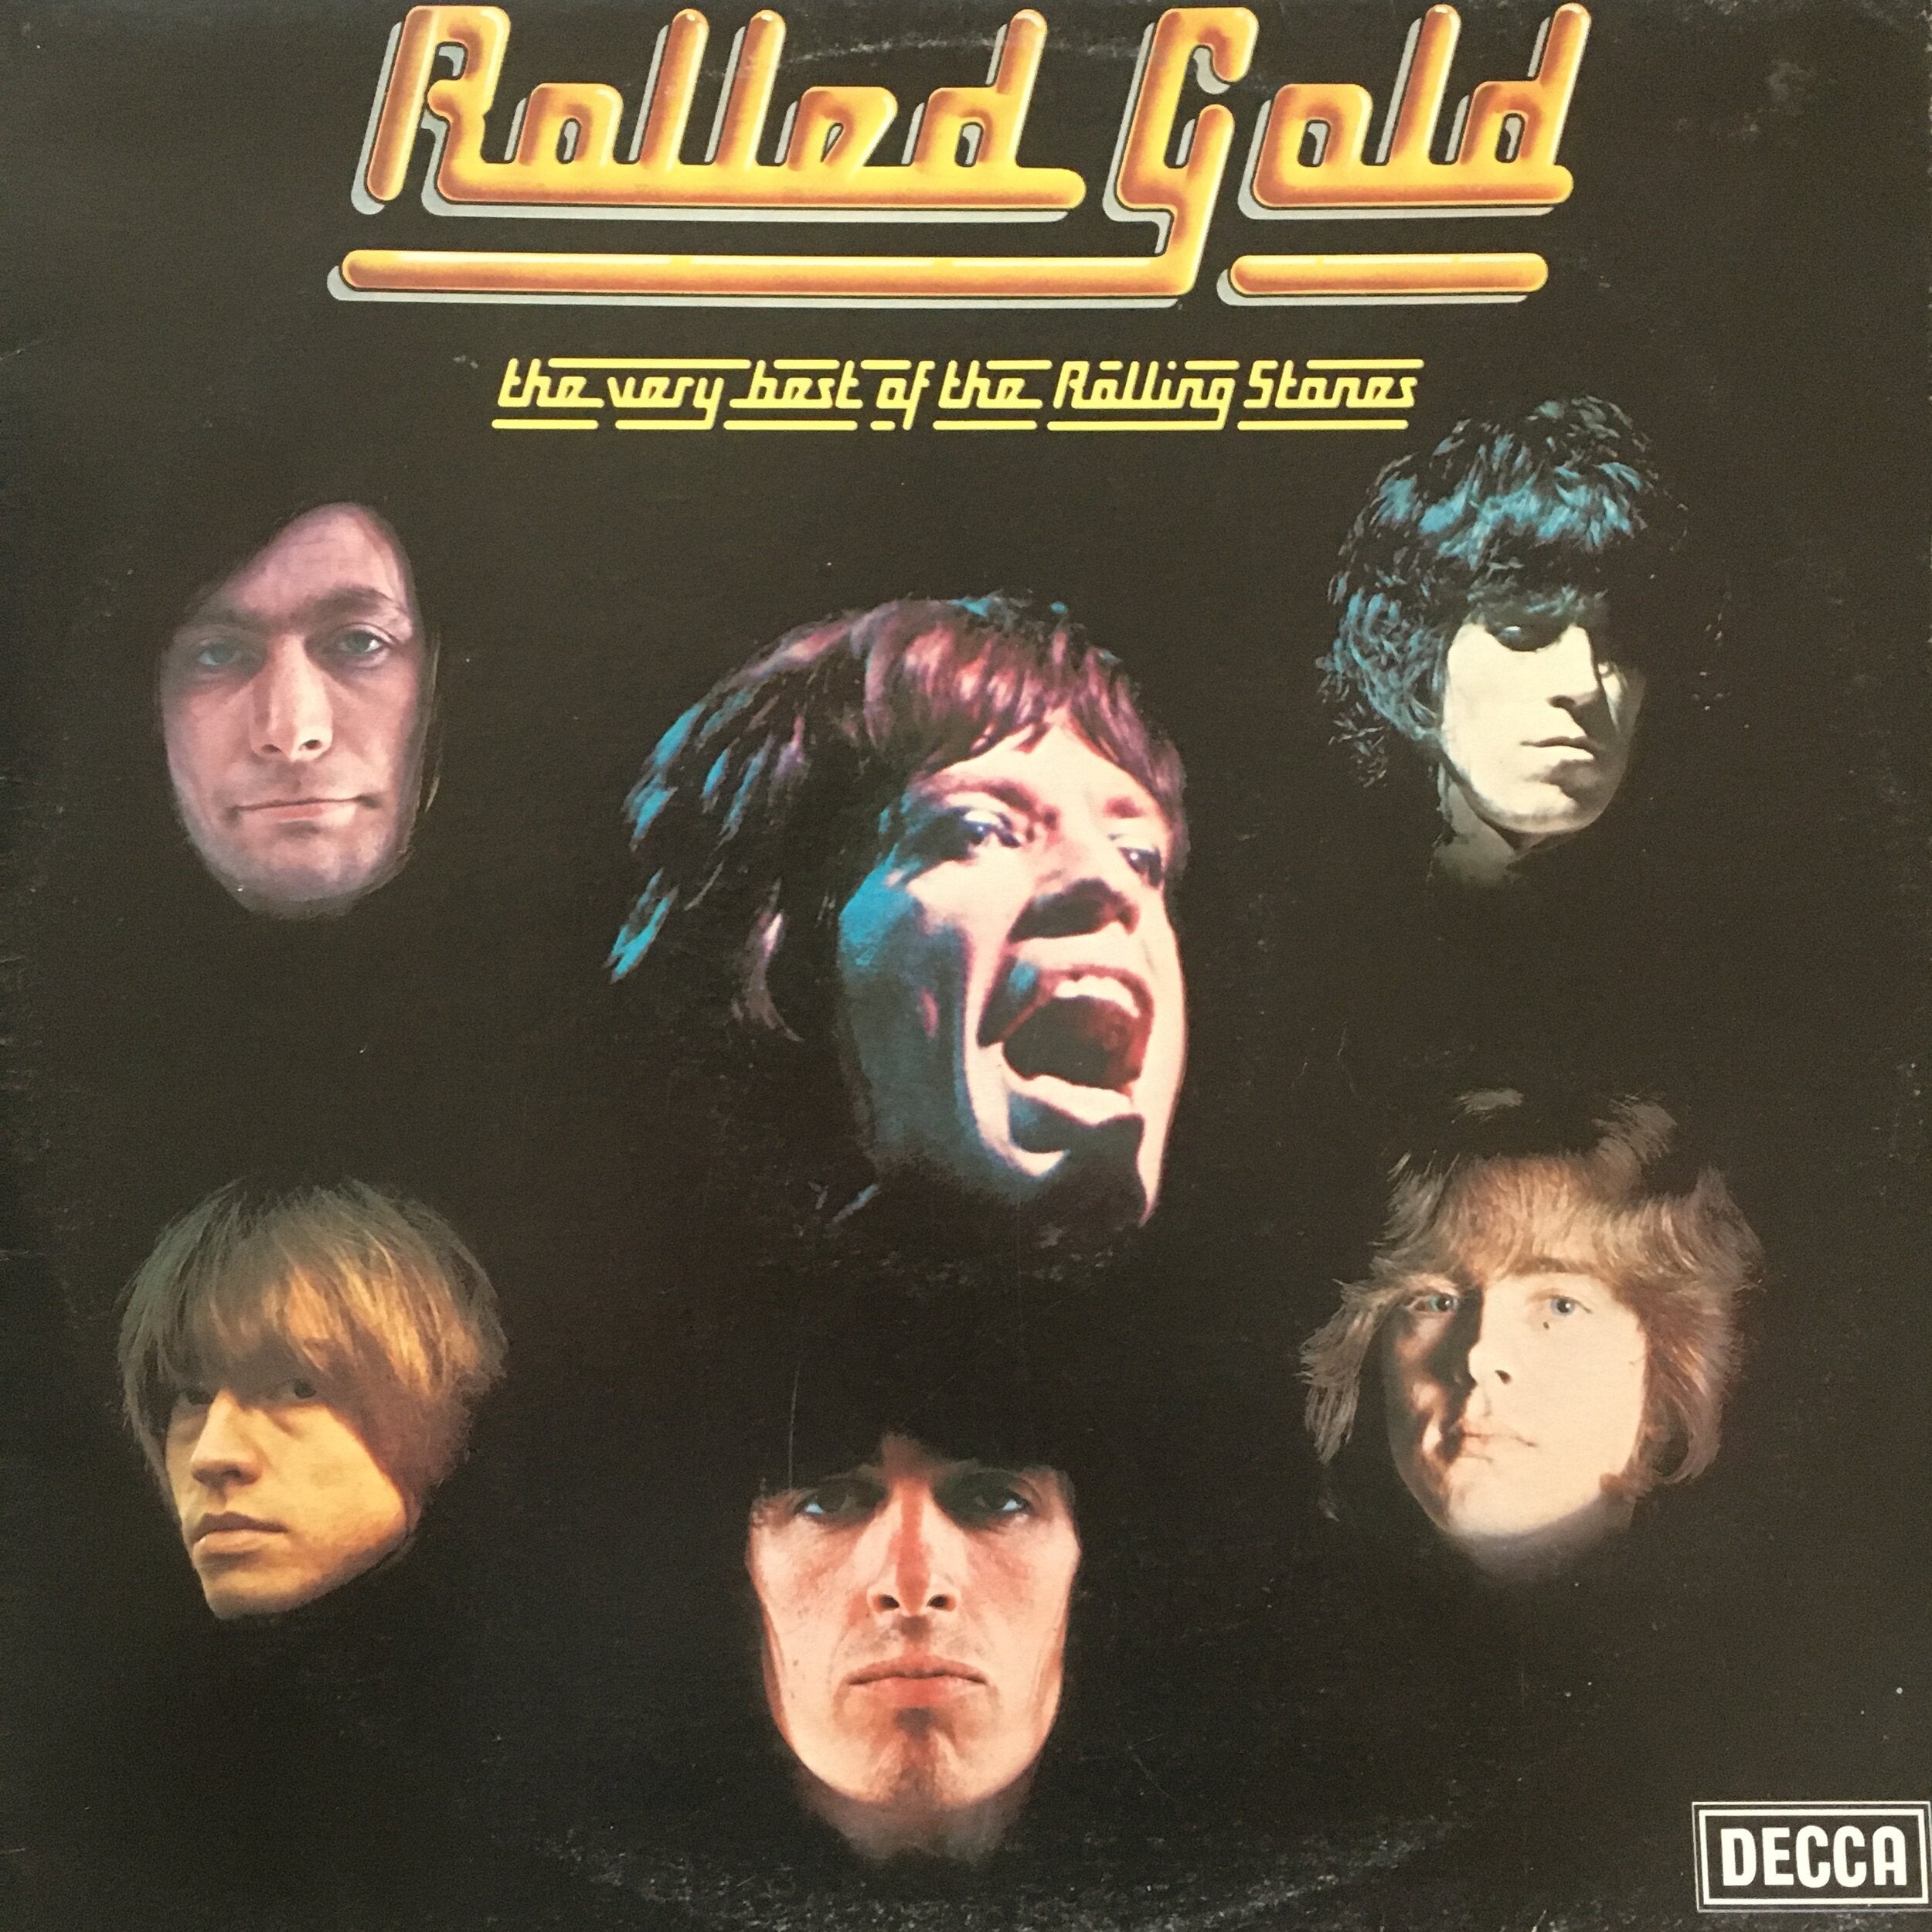 The Rolling Stones ‎| Rolled Gold - The Very Best Of The Rolling Stones